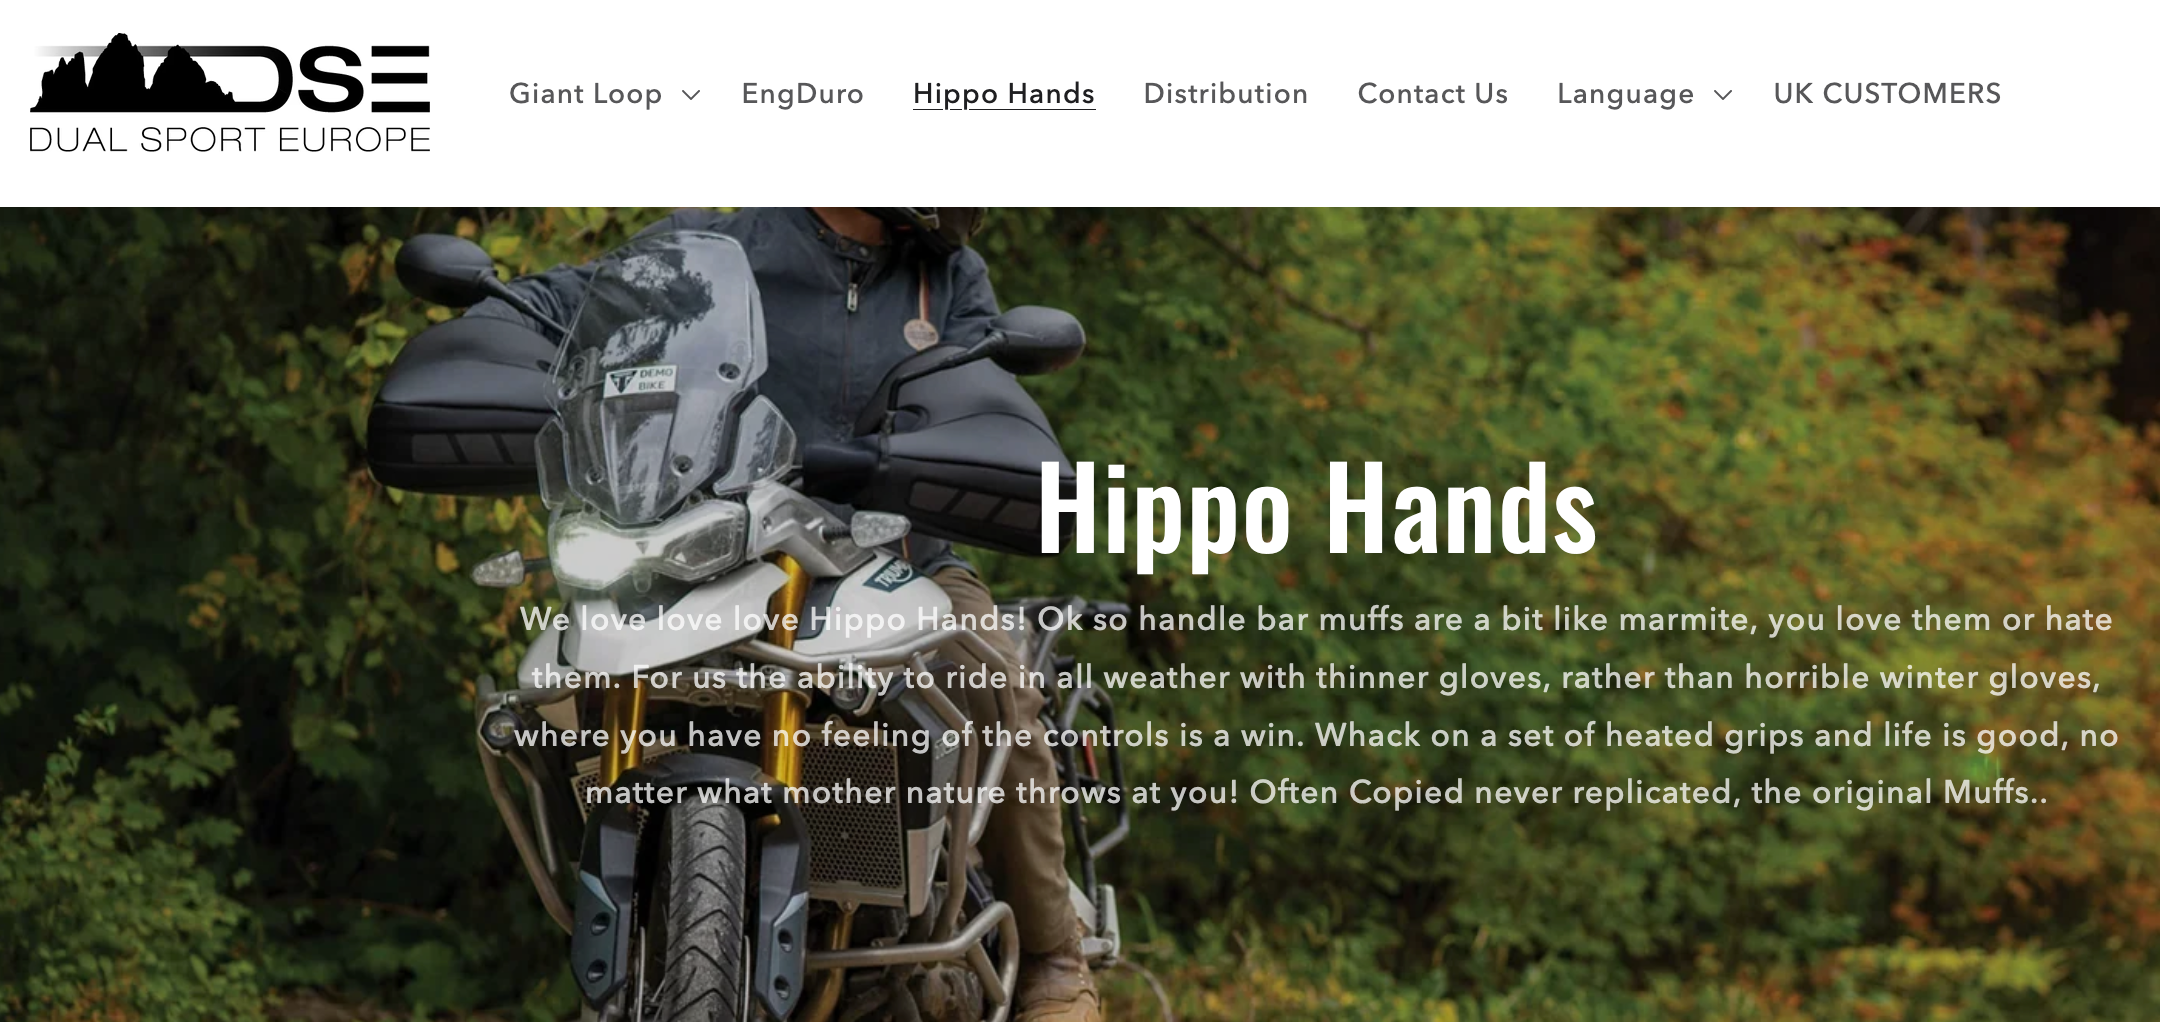 UK customers- Hippo Hands now for sale through Dual Sport Europe